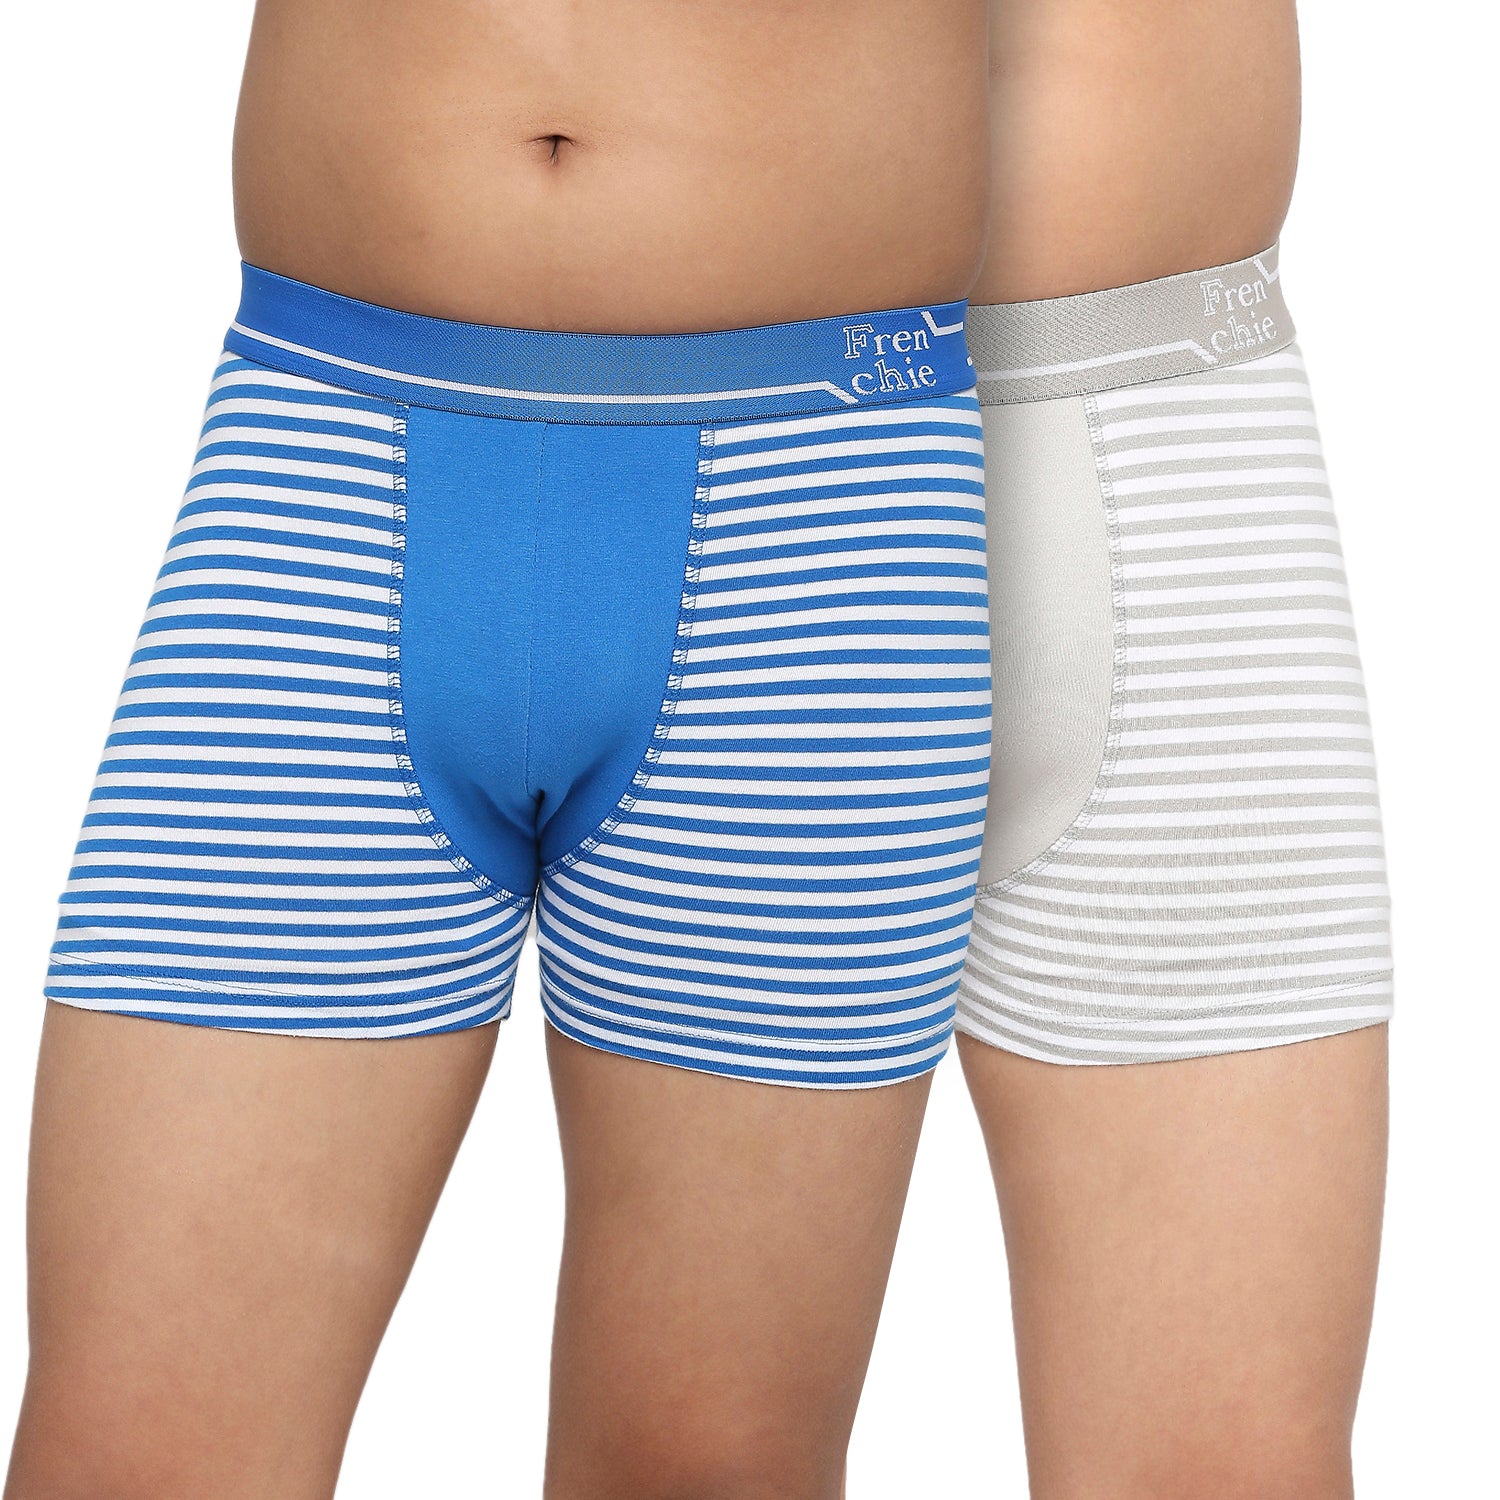 FRENCHIE Teenagers Cotton Trunk Gray and Blue - Pack of 2